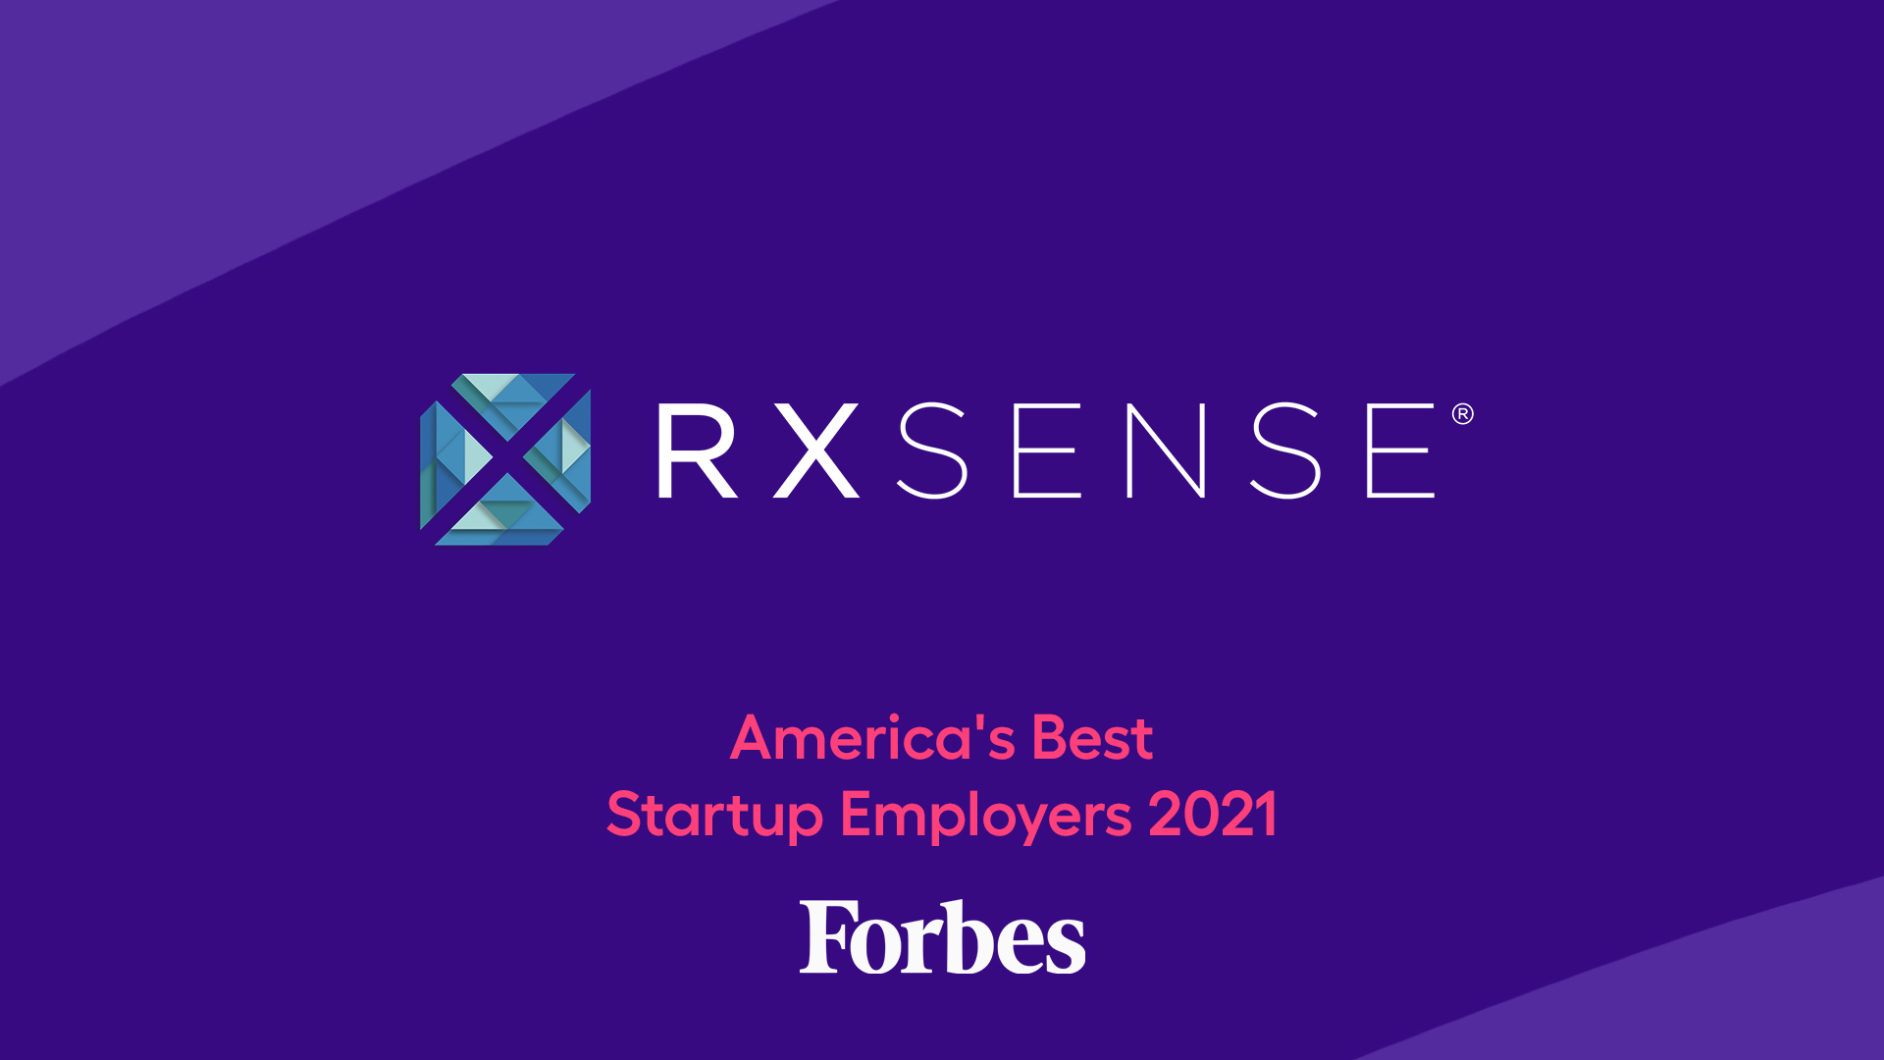 RxSense logo and Forbes logo - announcing America's Best Startup Employers 2021 winner